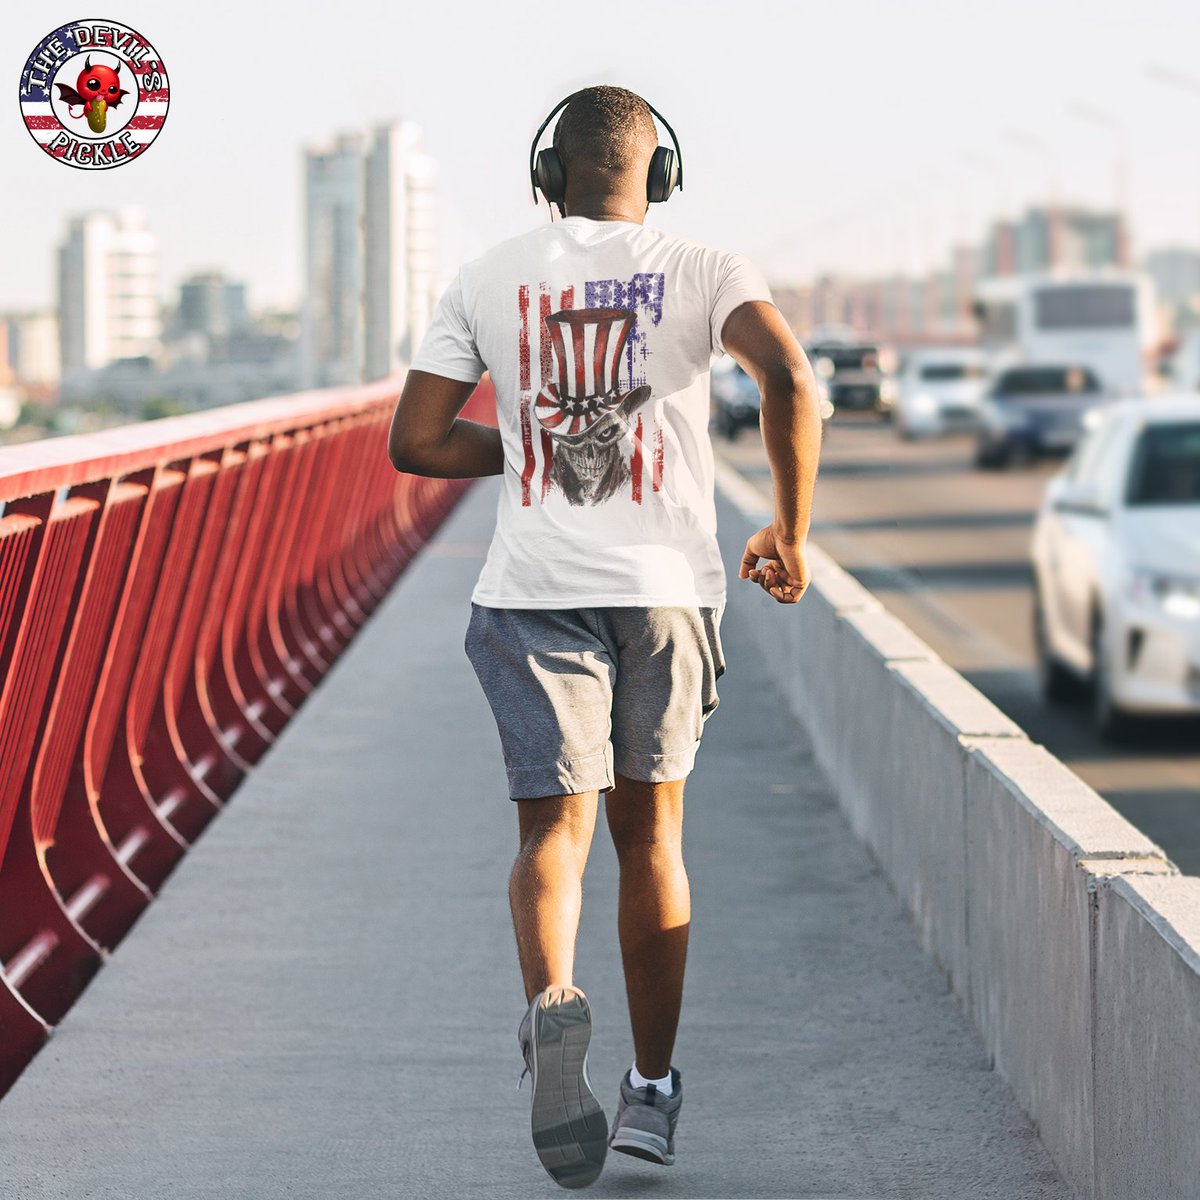 Rocking this devilishly awesome patriotic skull tee like a boss. We Have them, The Best Patriotic Tees and Shirts Available!

 #hellyeahamerica #2ndamendment #Freedom #offensivetshirts #UnitedStates #american #USA #merica  #patriotichoodies #americanpride #proudtobeanamerican